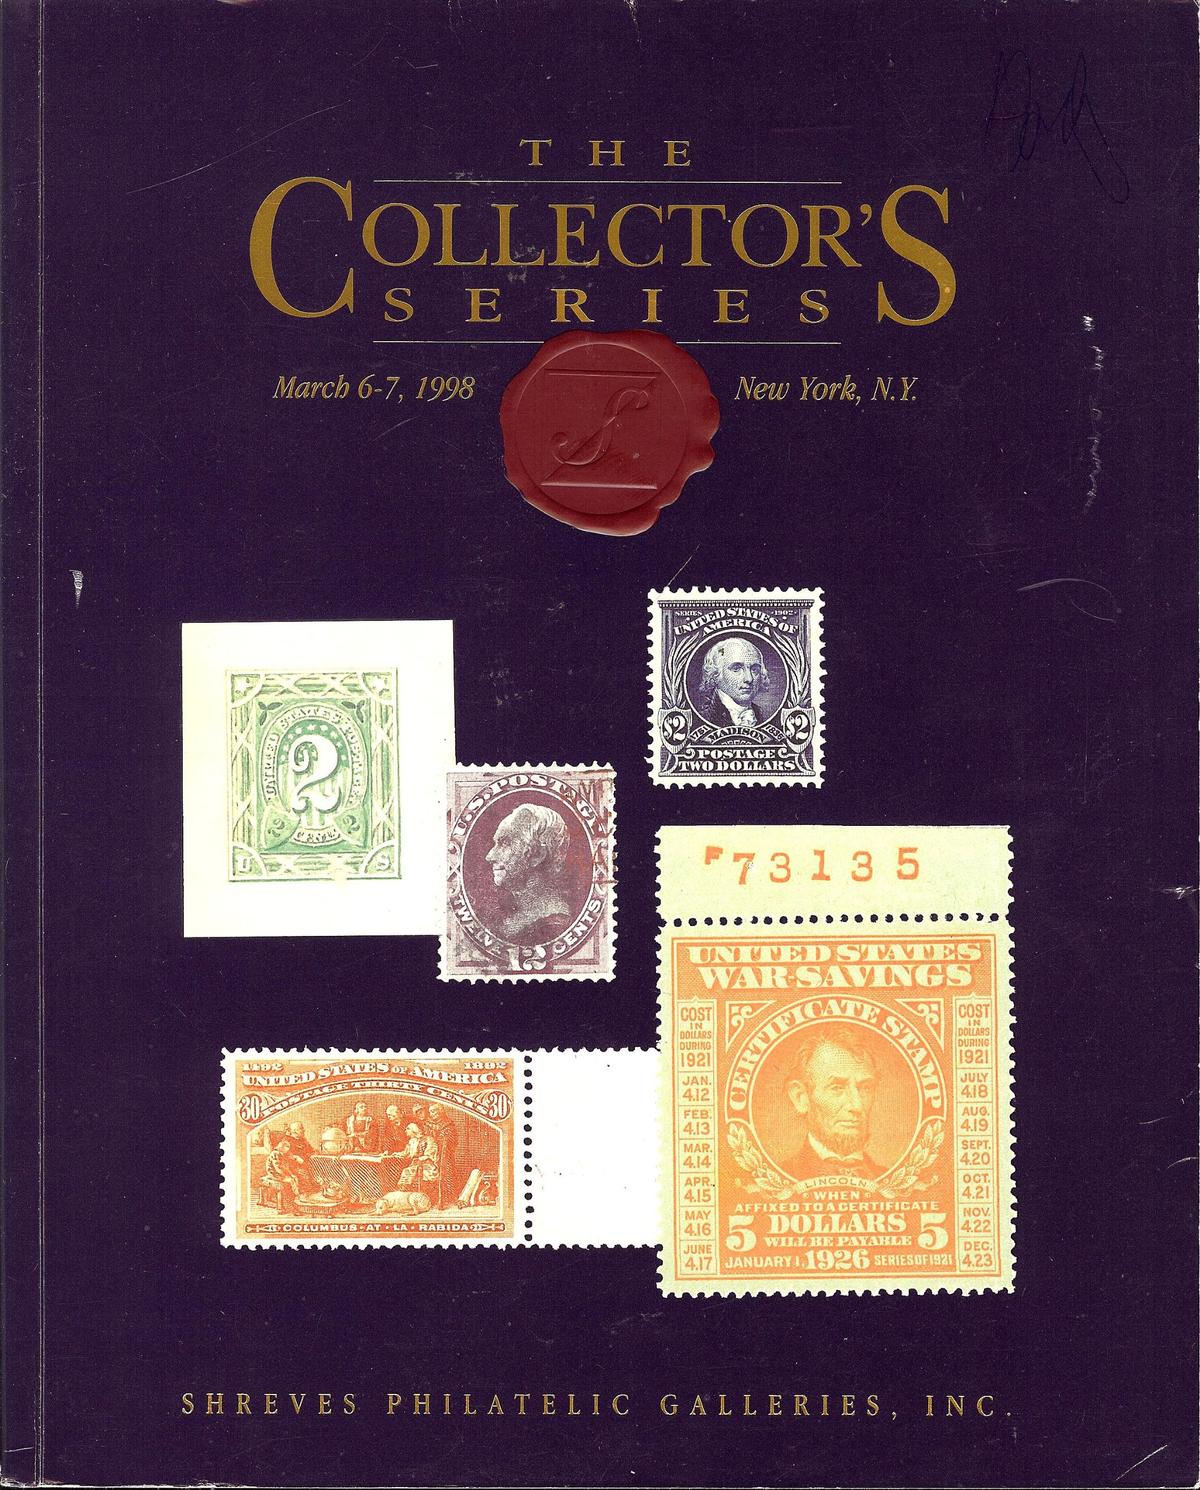 Stamp auction catalogs with winning bids information added can serve as a good indication of current and future values of investment-grade stamps. (Courtesy Shreve's Philatellic Galleries)